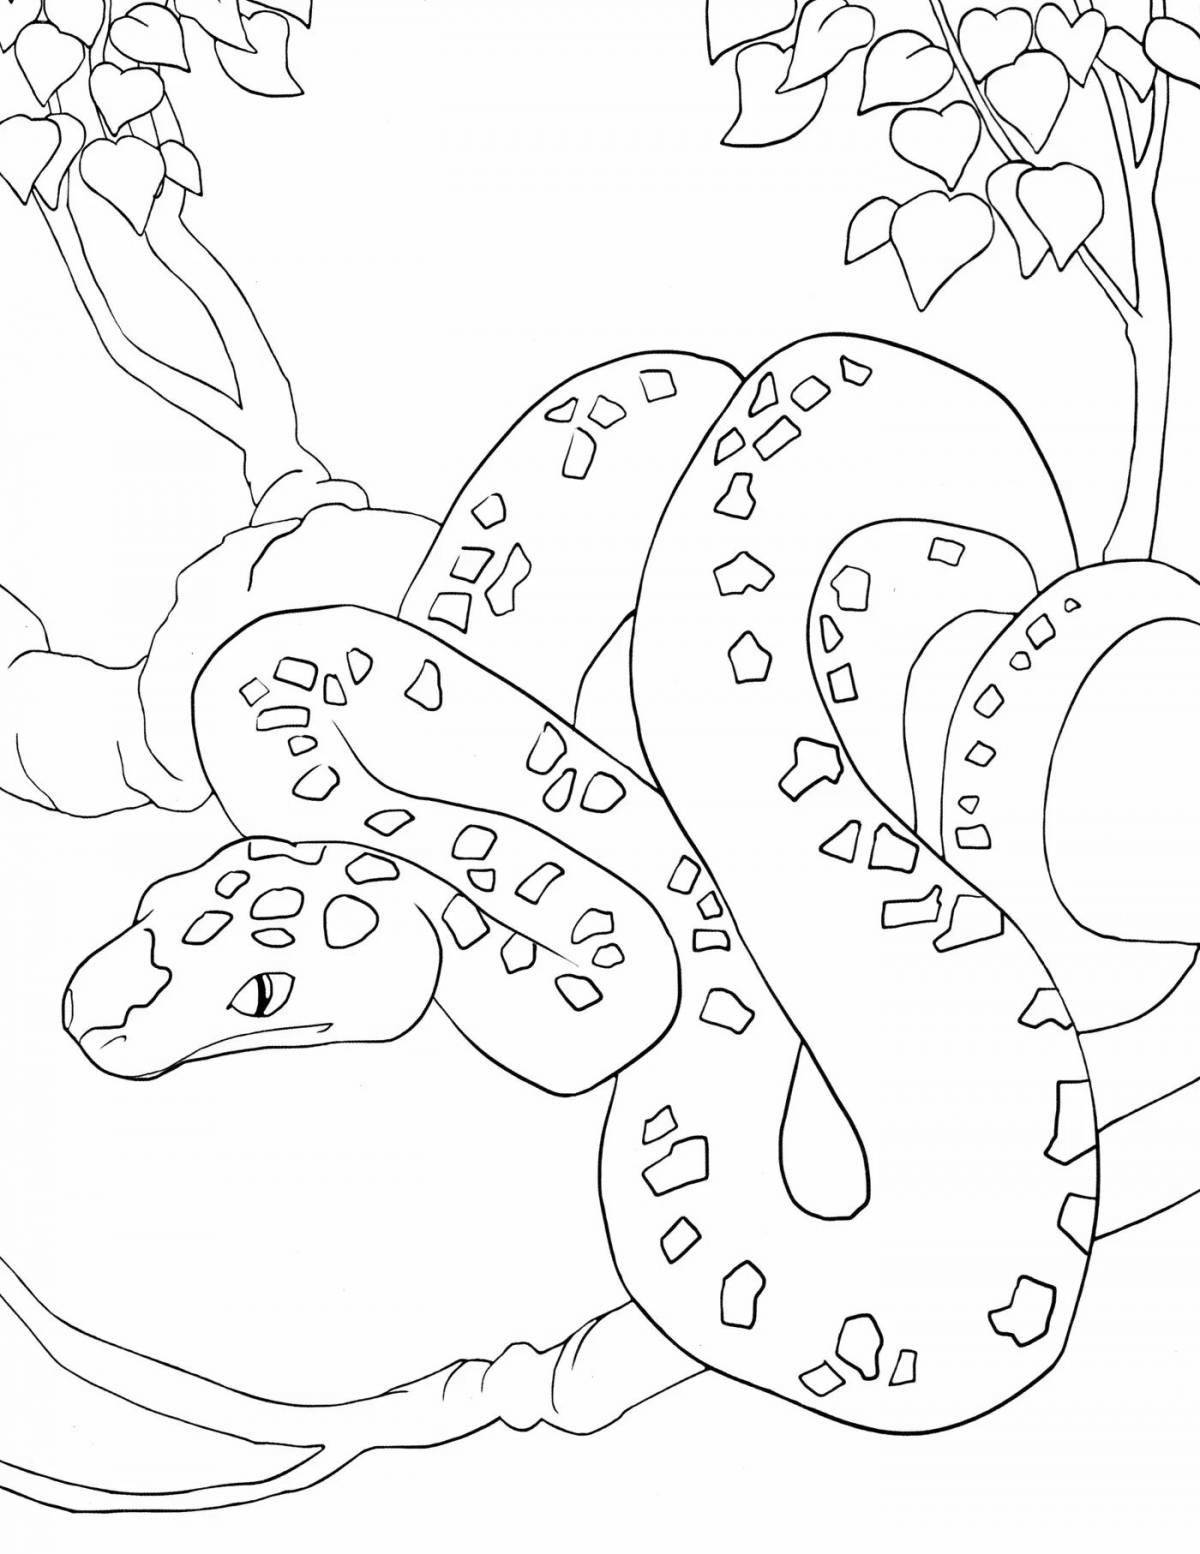 Vibrant python coloring page